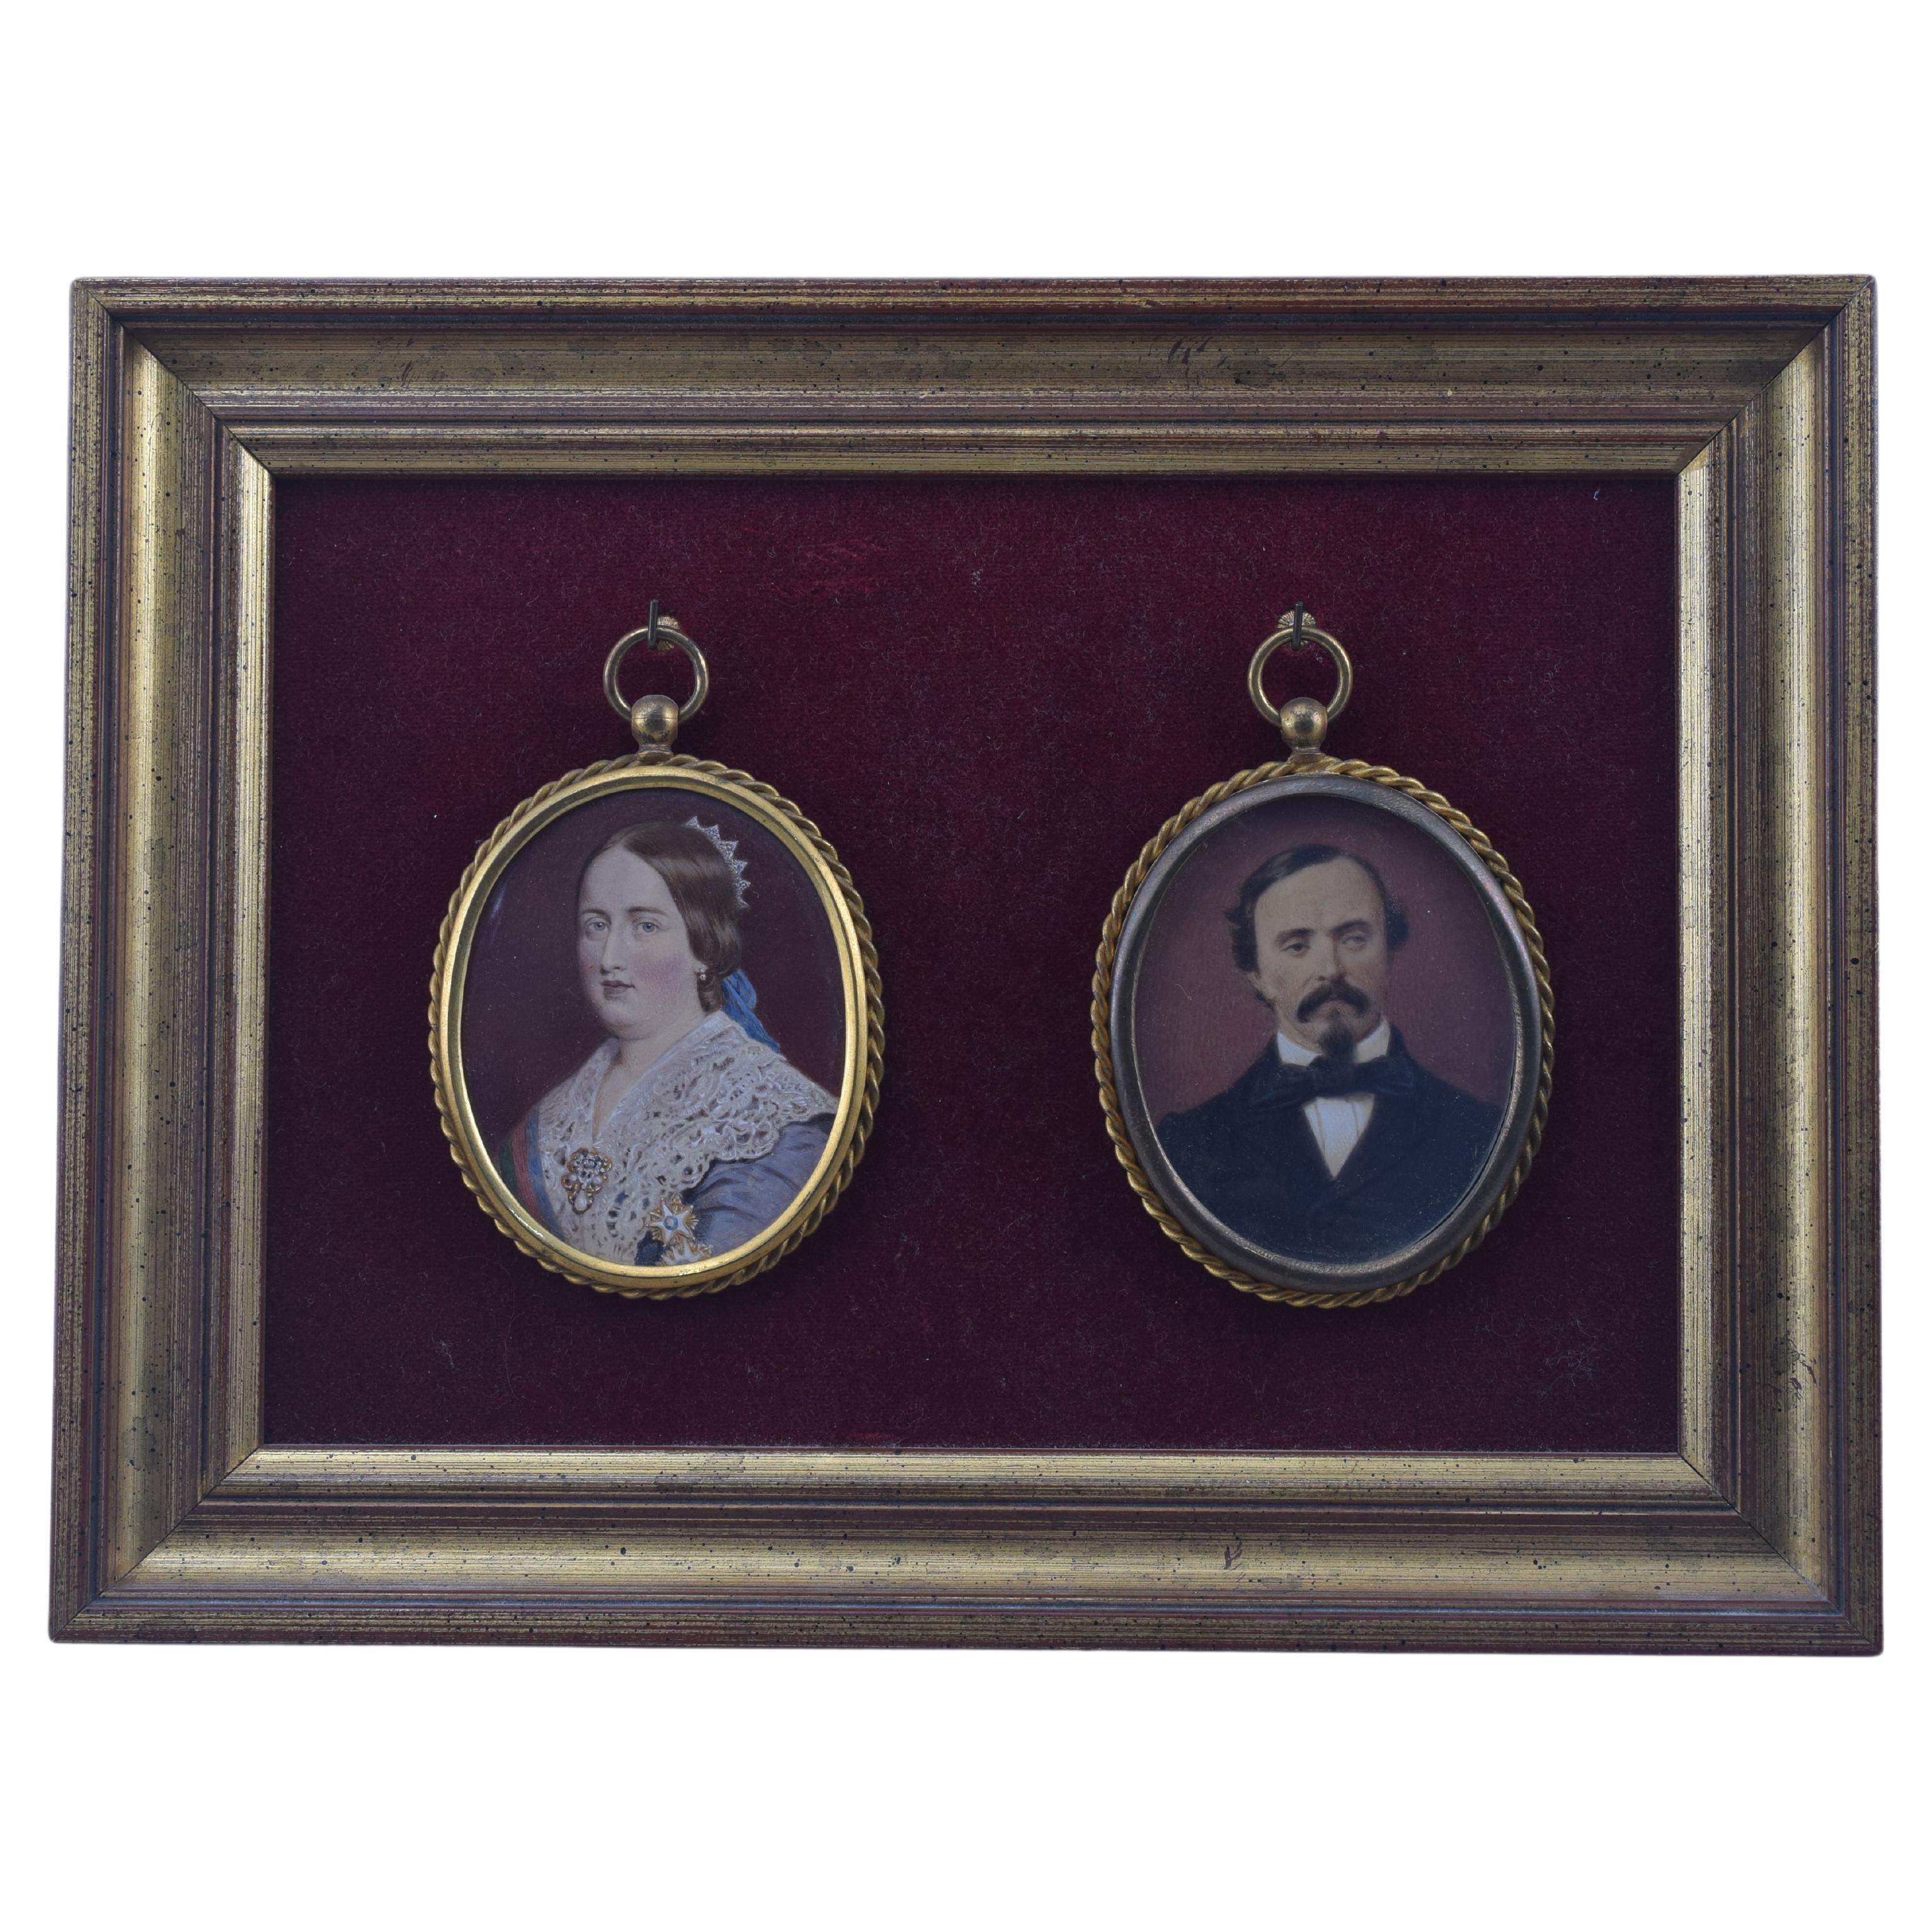 Pair of miniatures in medallions, possibly Dukes of Montpensier. 19th century